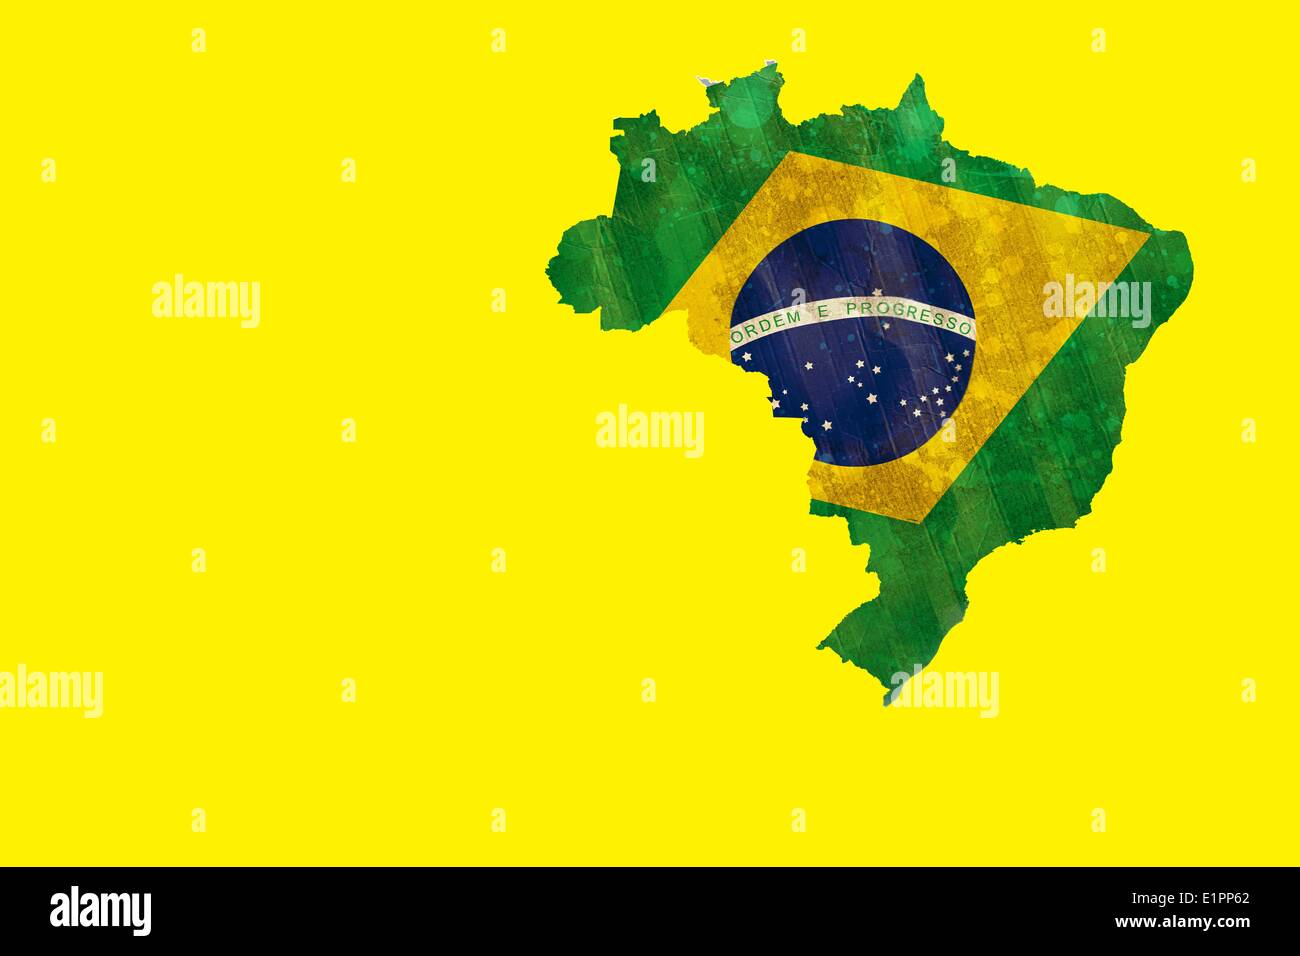 Green brazil outline with flag on yellow Stock Photo